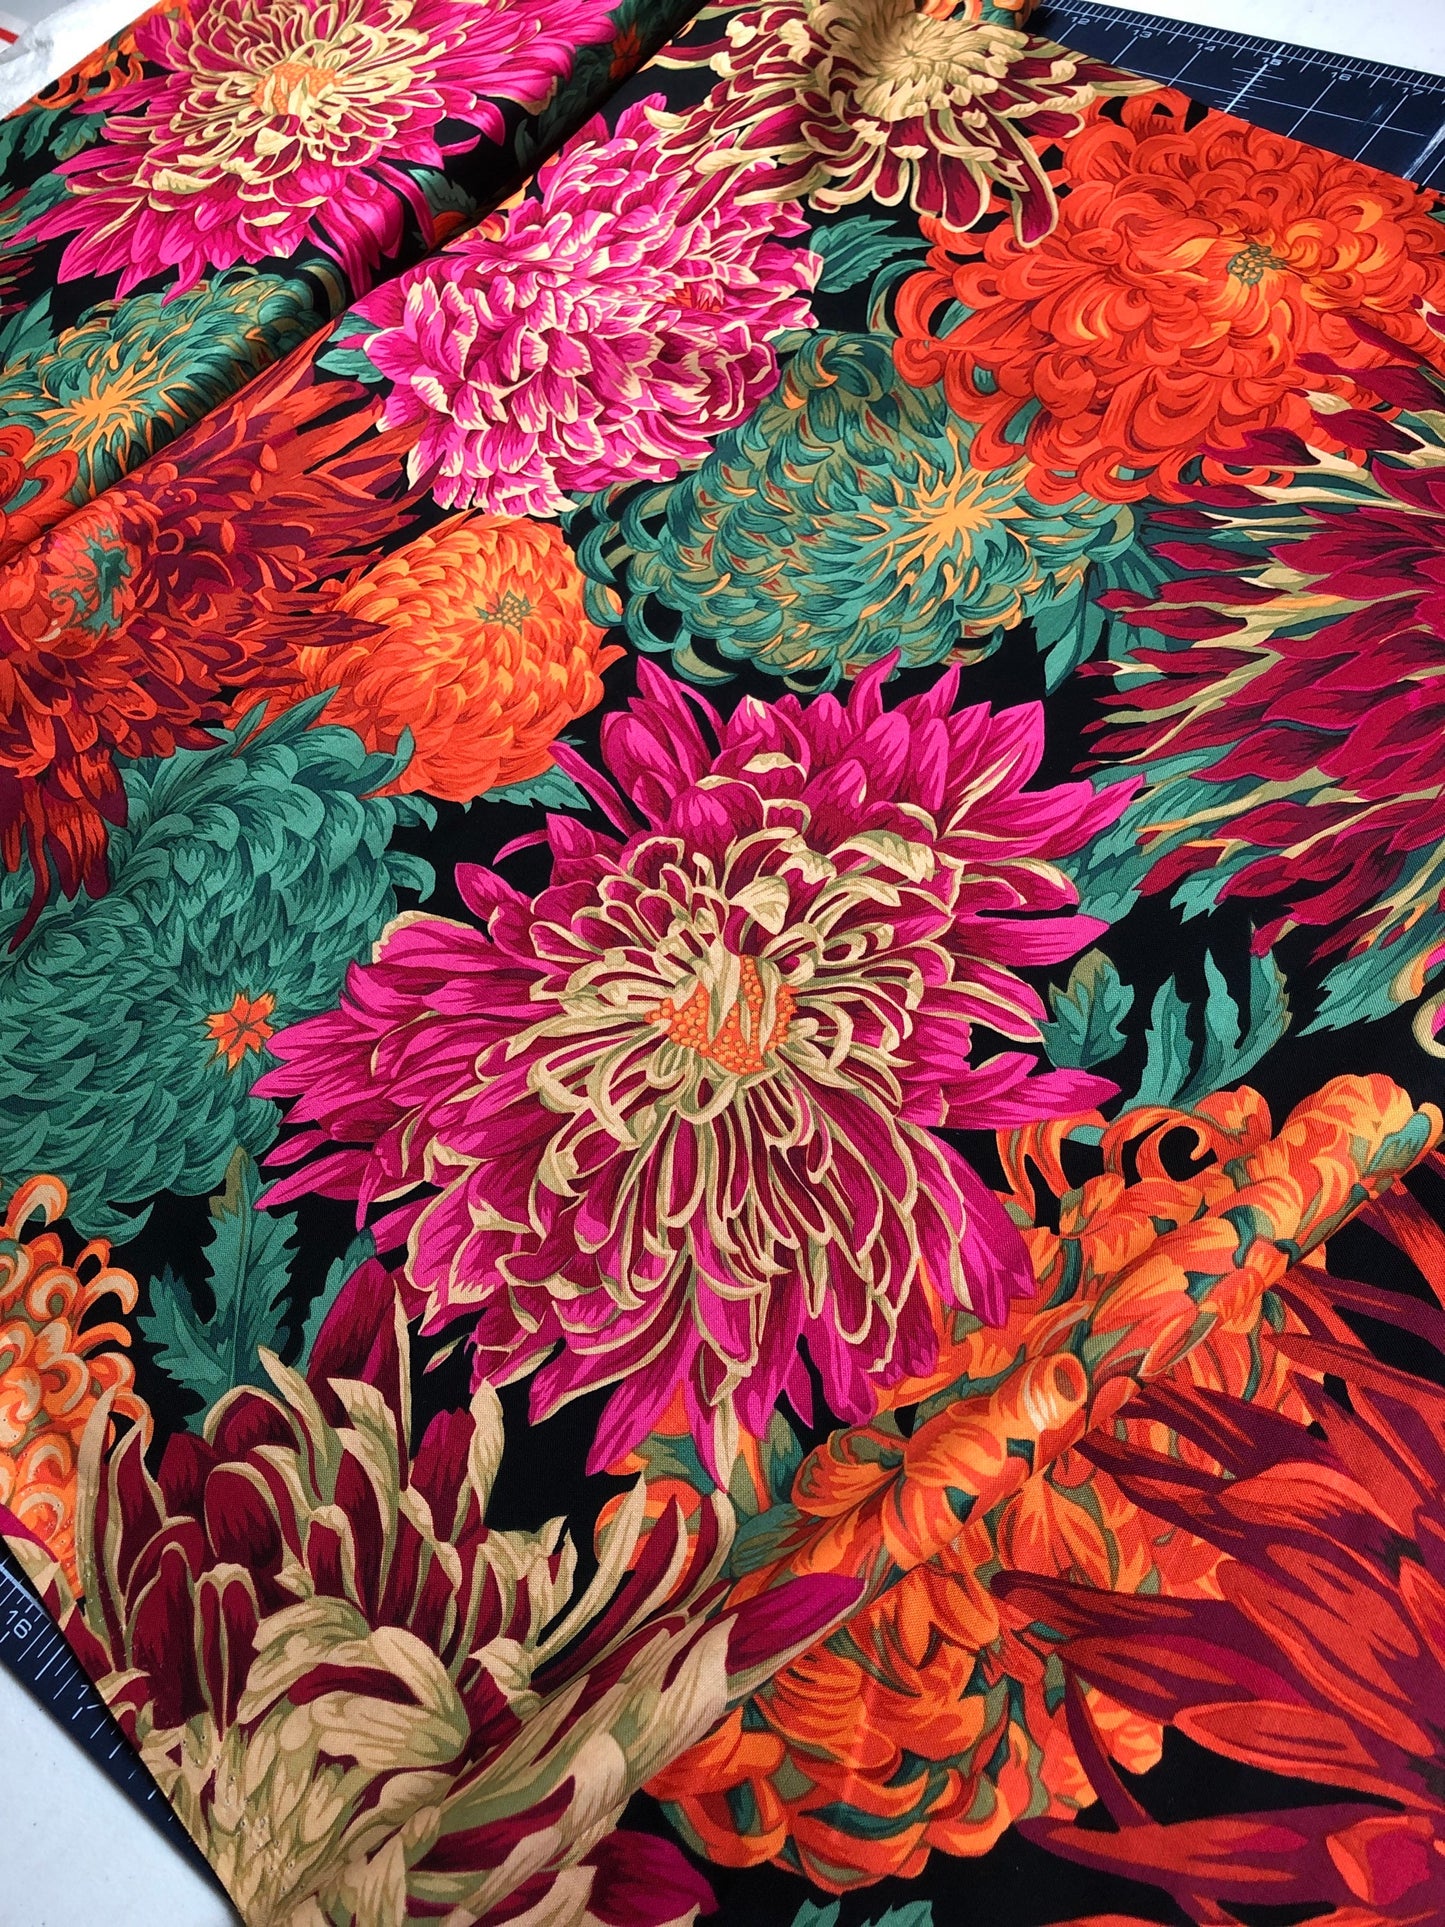 Kaffe JAPANESE CHRYSANTHEMUM Red PJ41, Kaffe Fassett Fabric, Philip Jacobs, Quilt Fabric, Floral, Large Print Fabric, Fabric By The Yard